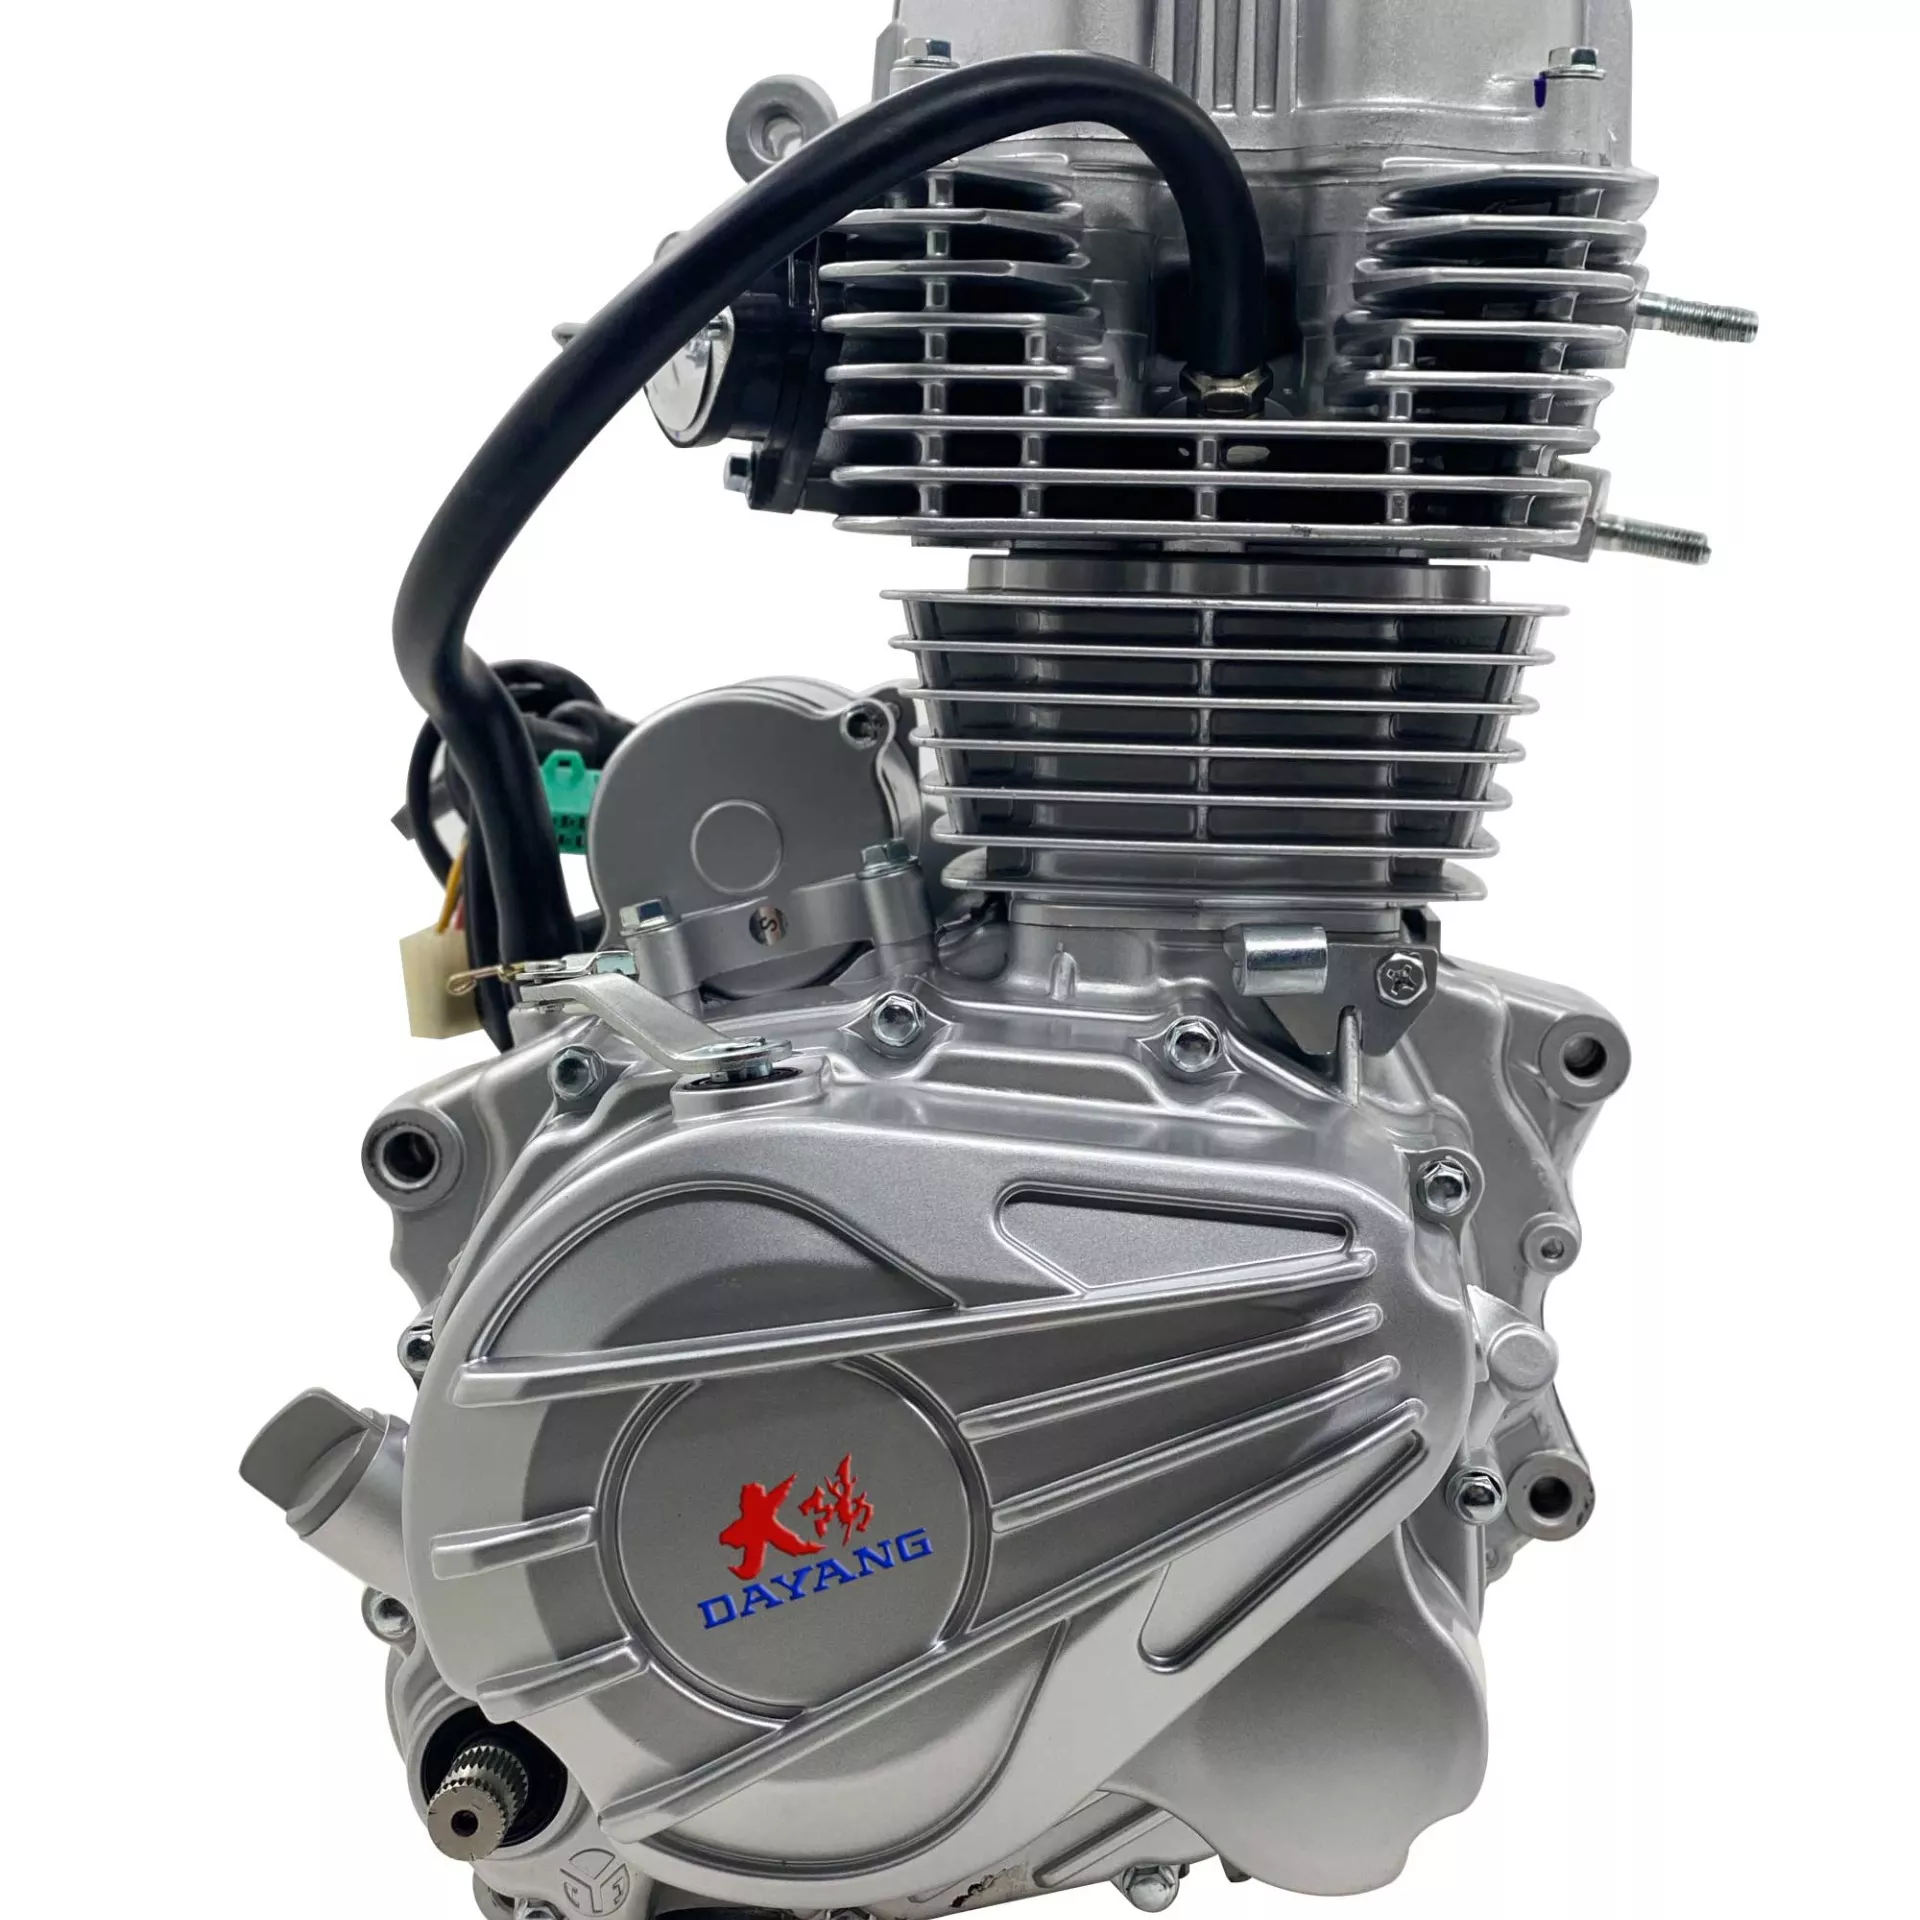 DAYANG 200CC single cylinder four stroke air cooled engine assembly for tricycles three wheels motorcycle part engines